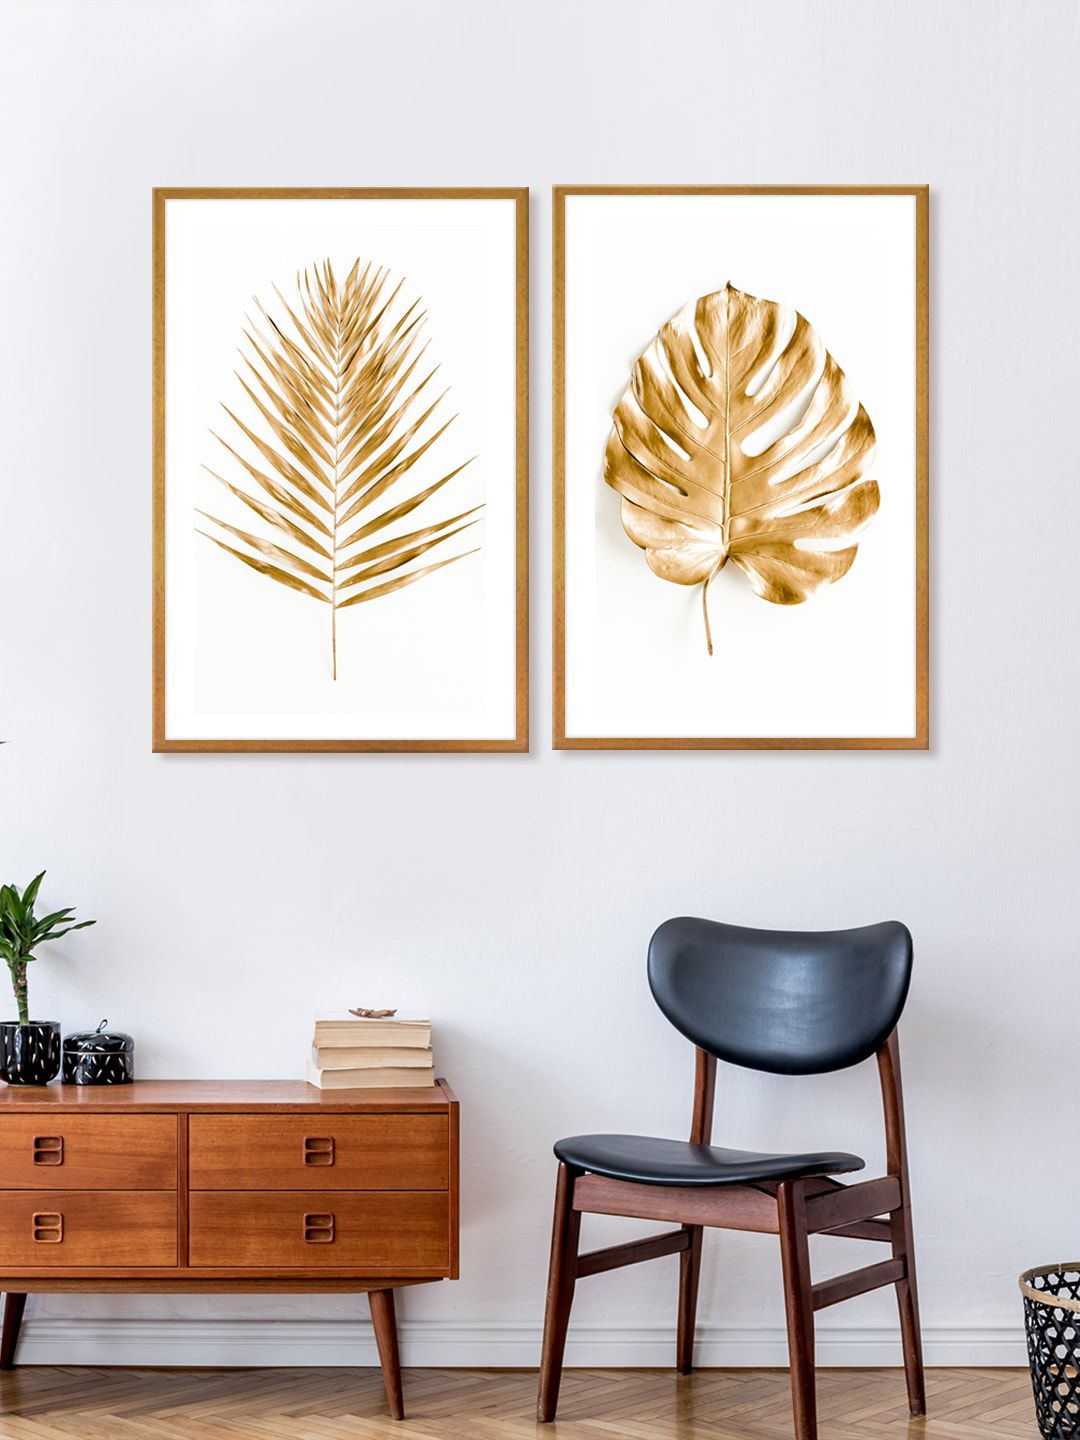 999Store Set Of 2 White & Gold-Toned Leaves & Palm Tree Printed Wall Art Price in India